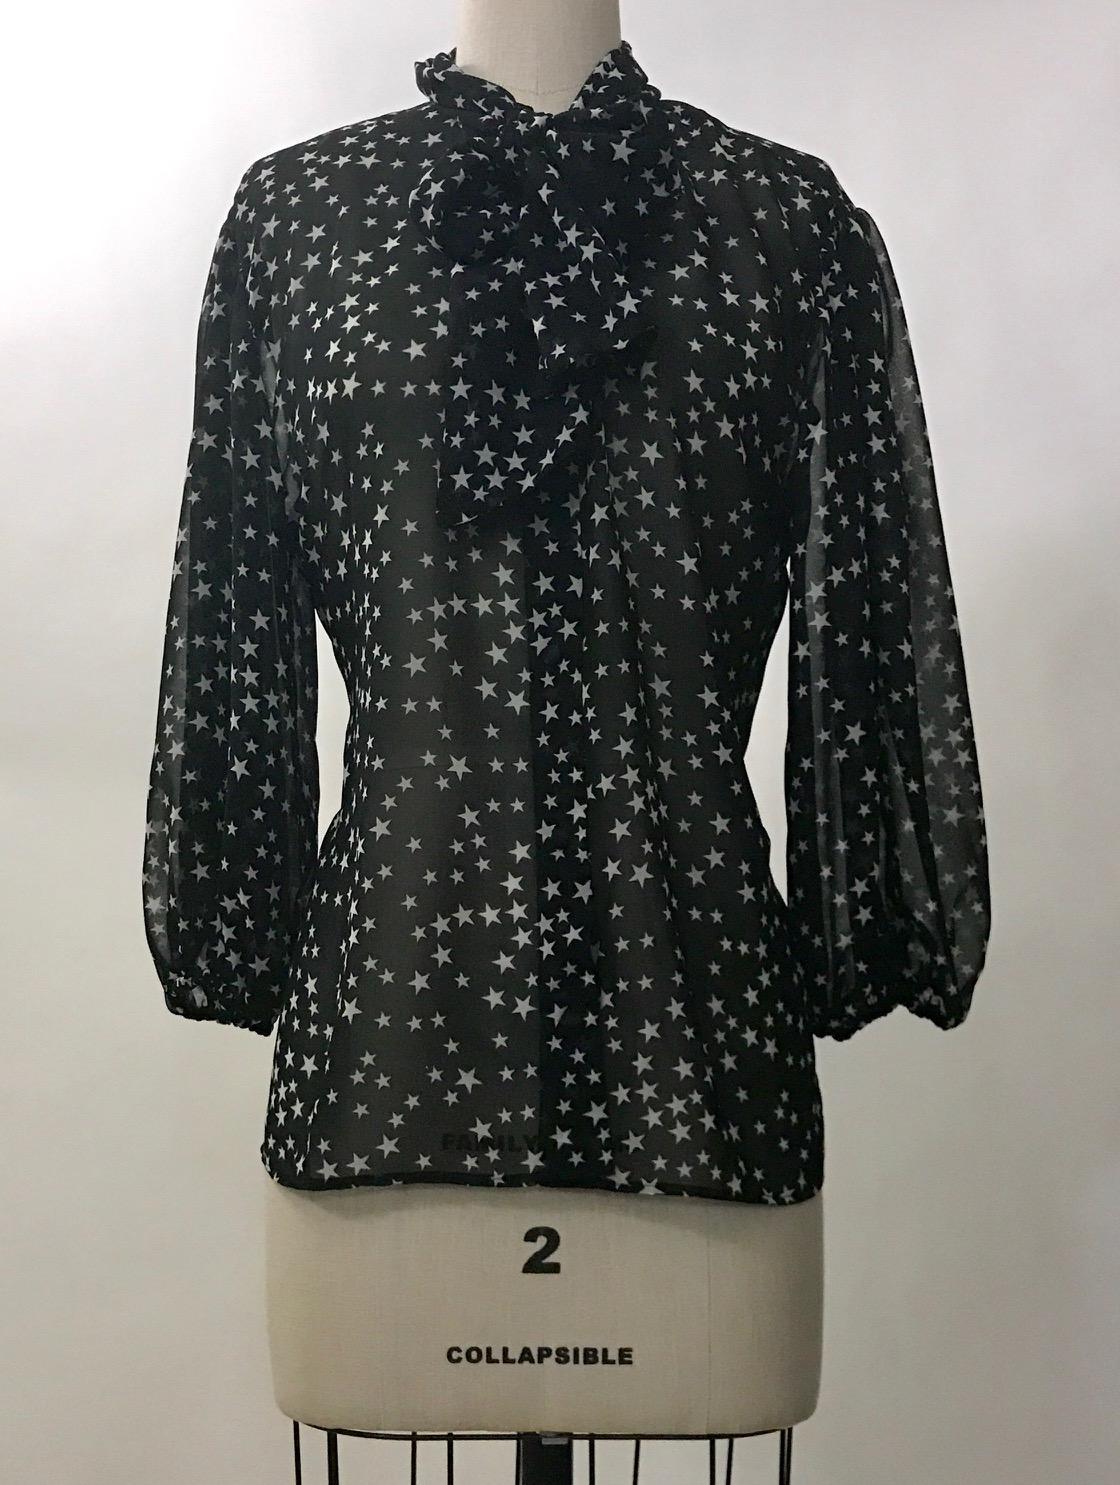 Dolce & Gabbana semi-sheer black and white star print blouse from the Fall 2011 collection. Fabric at neck can be tied as a pussycat bow or left to hang for a scarf like look. Elastic at cuffs creates a slightly voluminous sleeve. Button